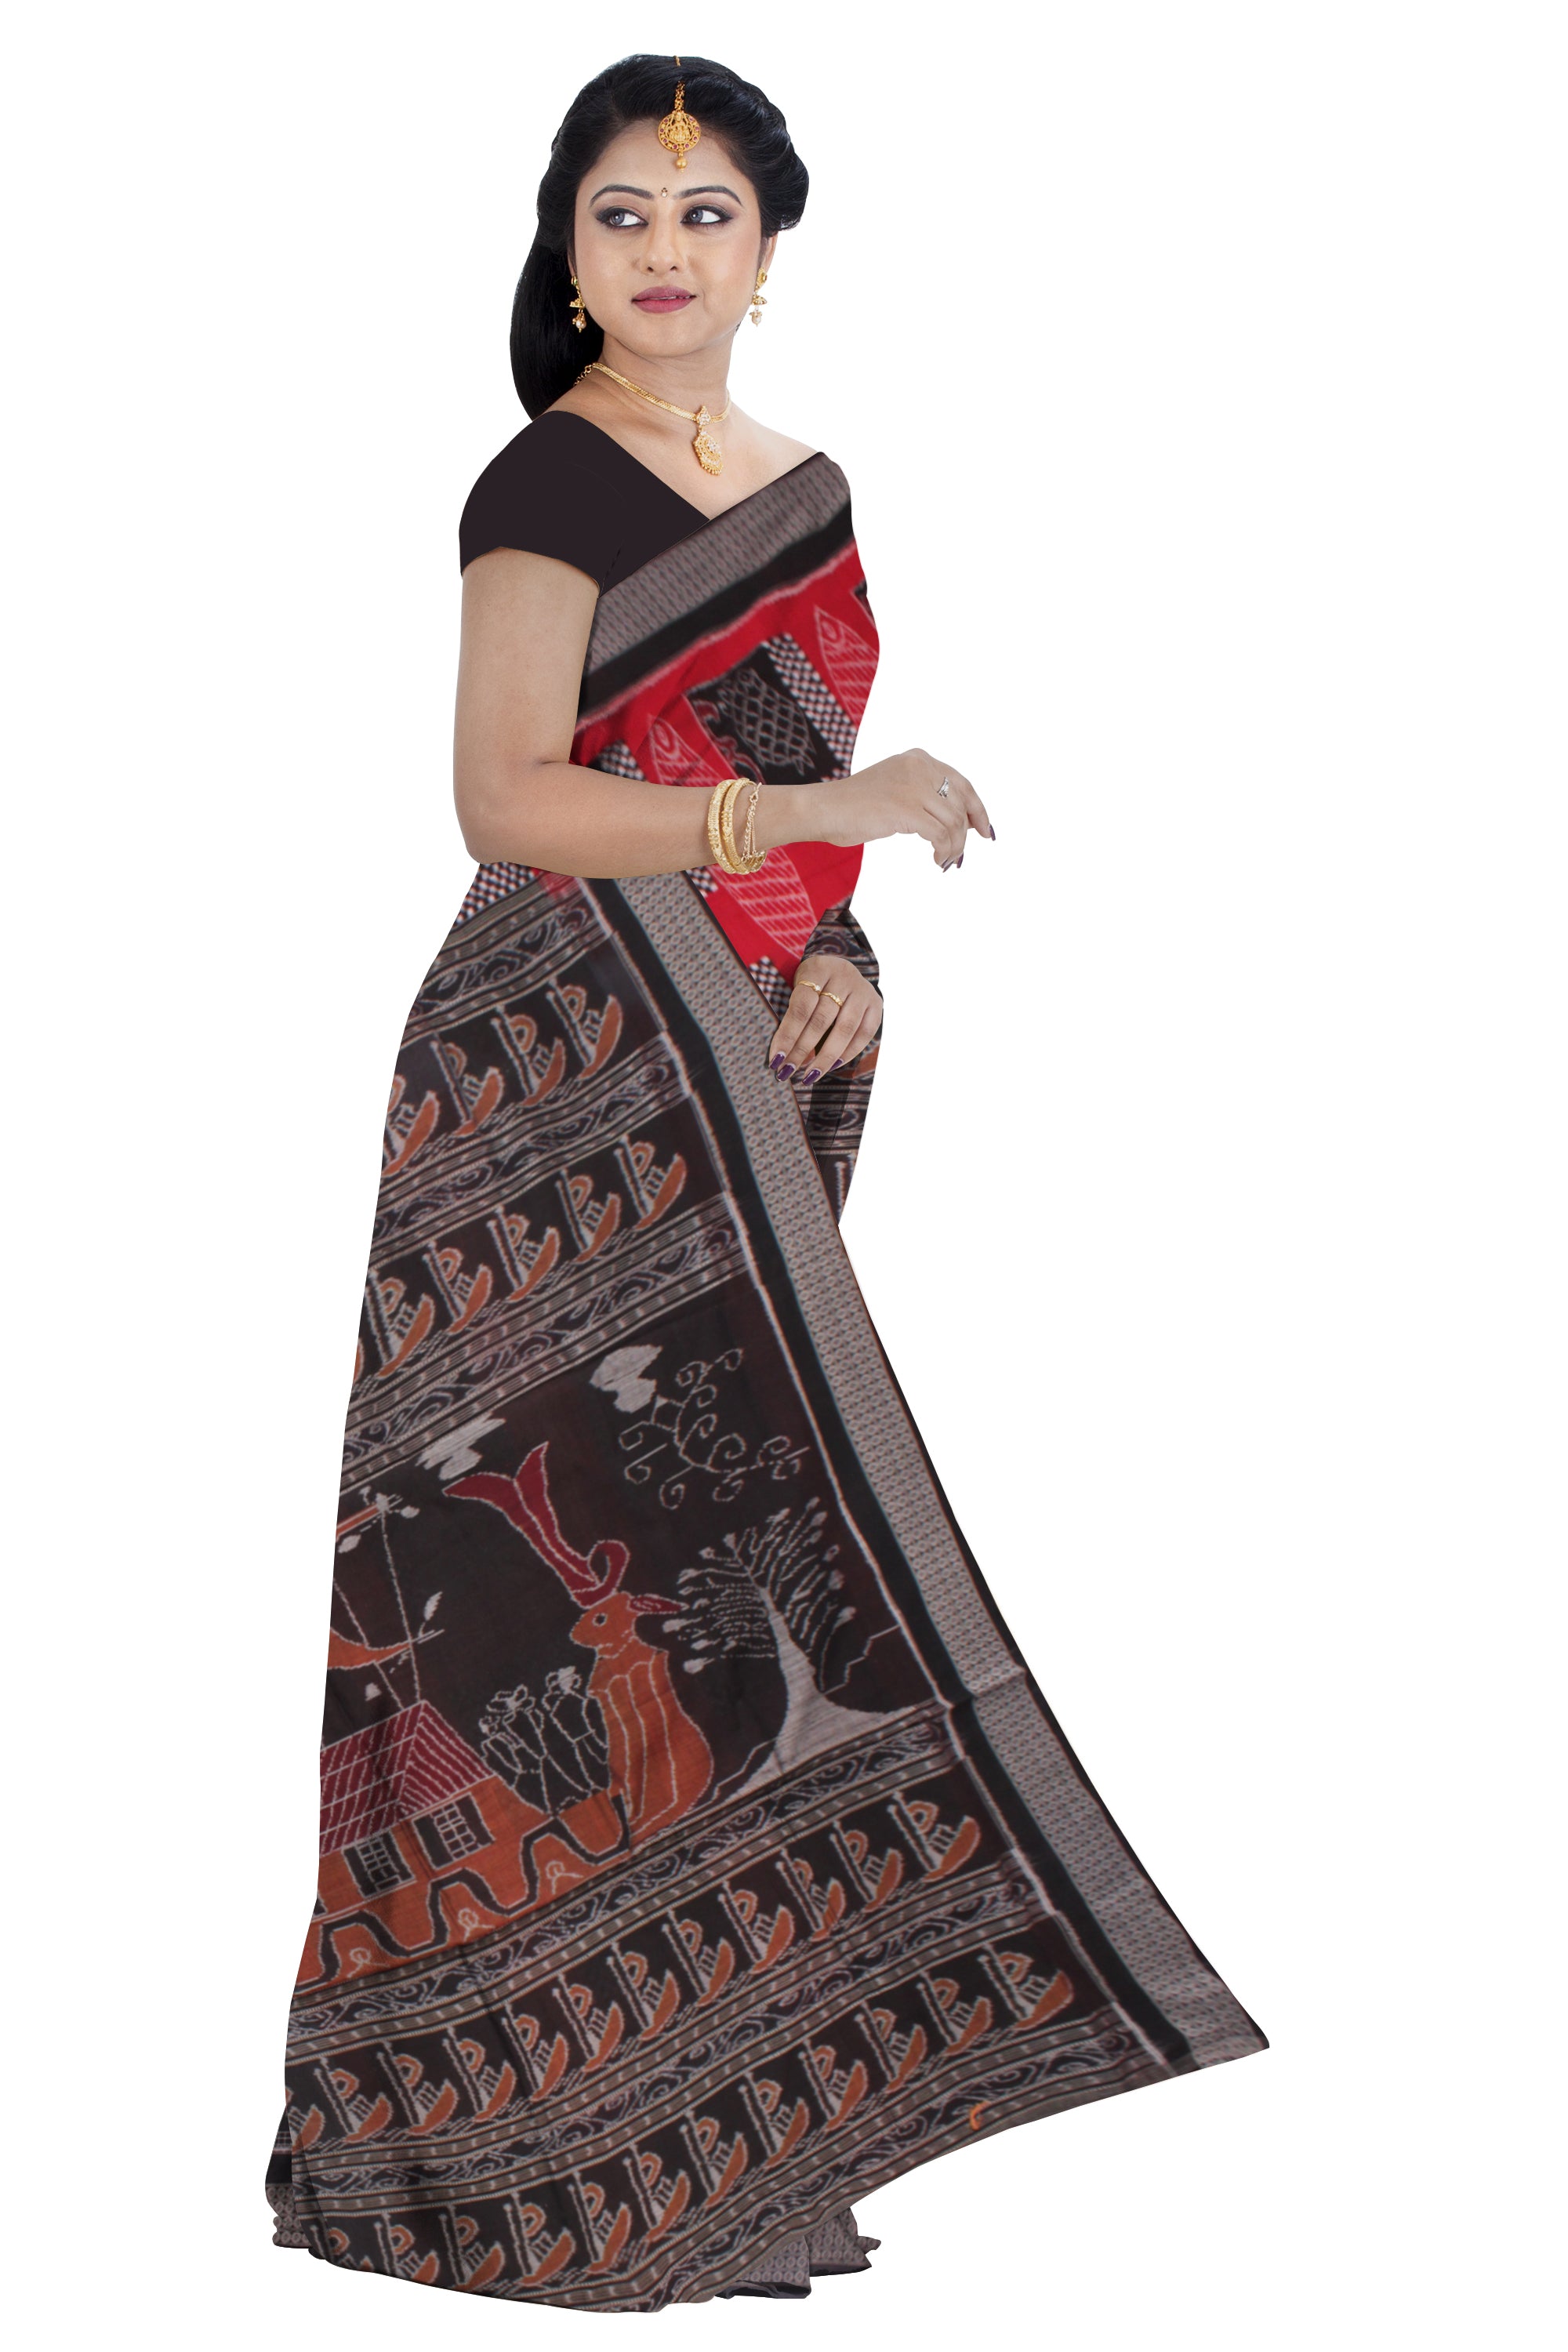 MAROON AND BLACK COLOR FISH PATTERN PURE OOTTON SAREE, WITHOUT BLOUSE PIECE. - Koshali Arts & Crafts Enterprise